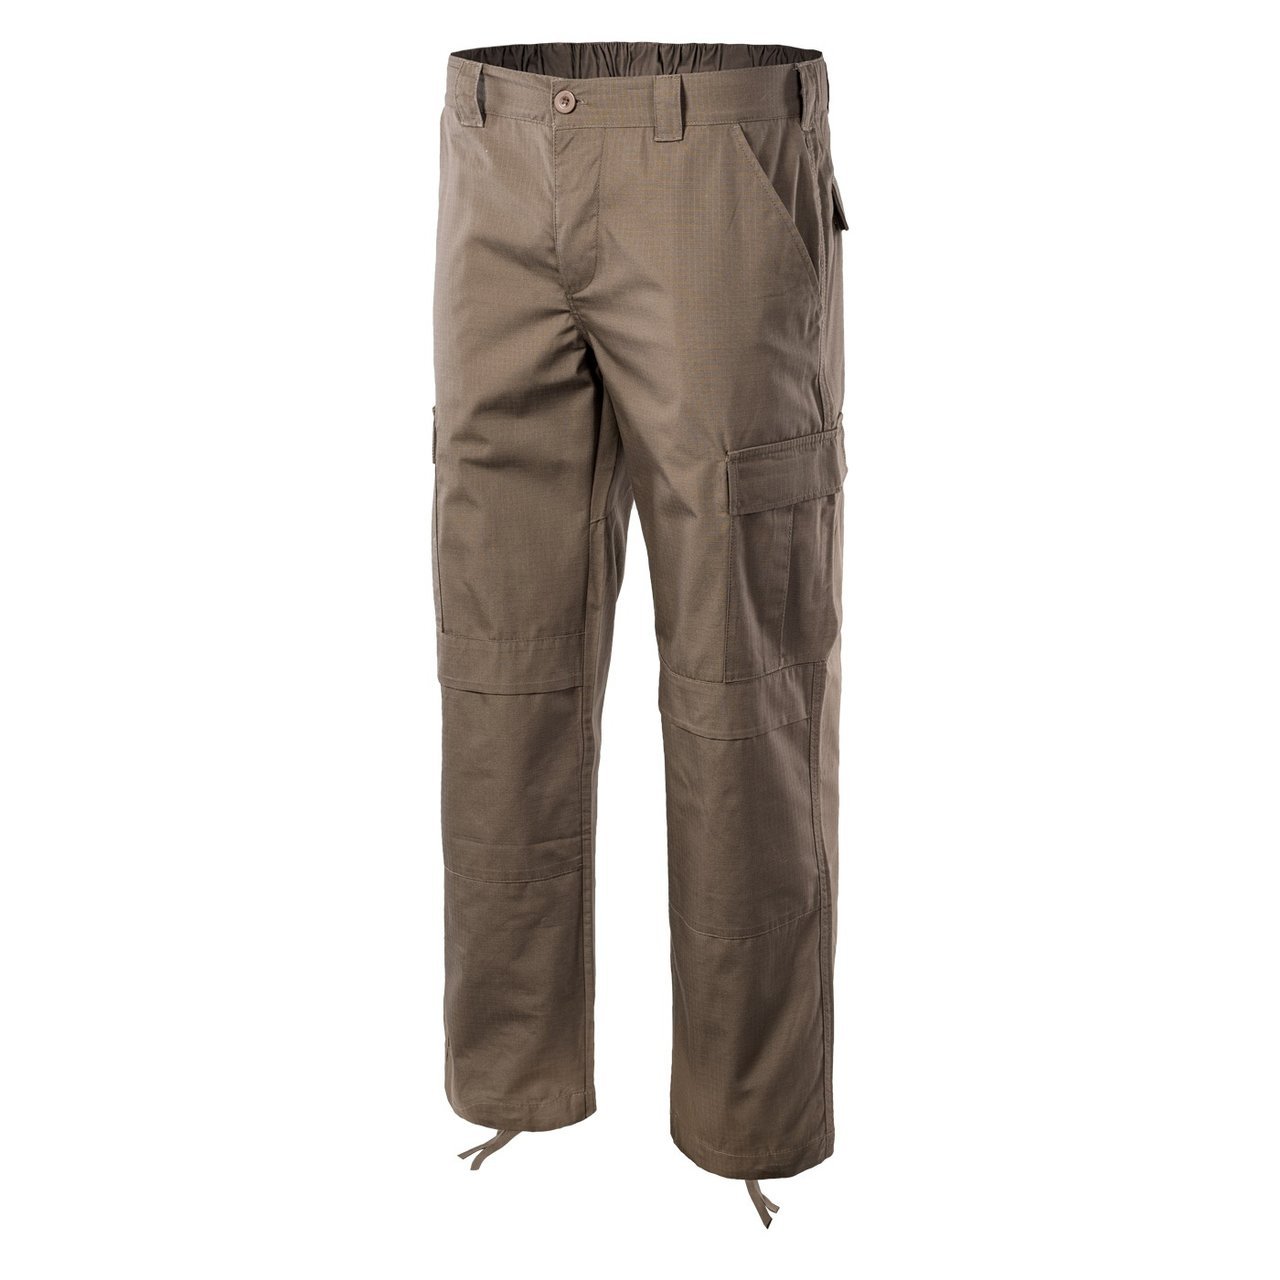 TROUSERS ATERO 3.0 - COYOTE - MAGNUM Coyote | Apparel \ Pants ...